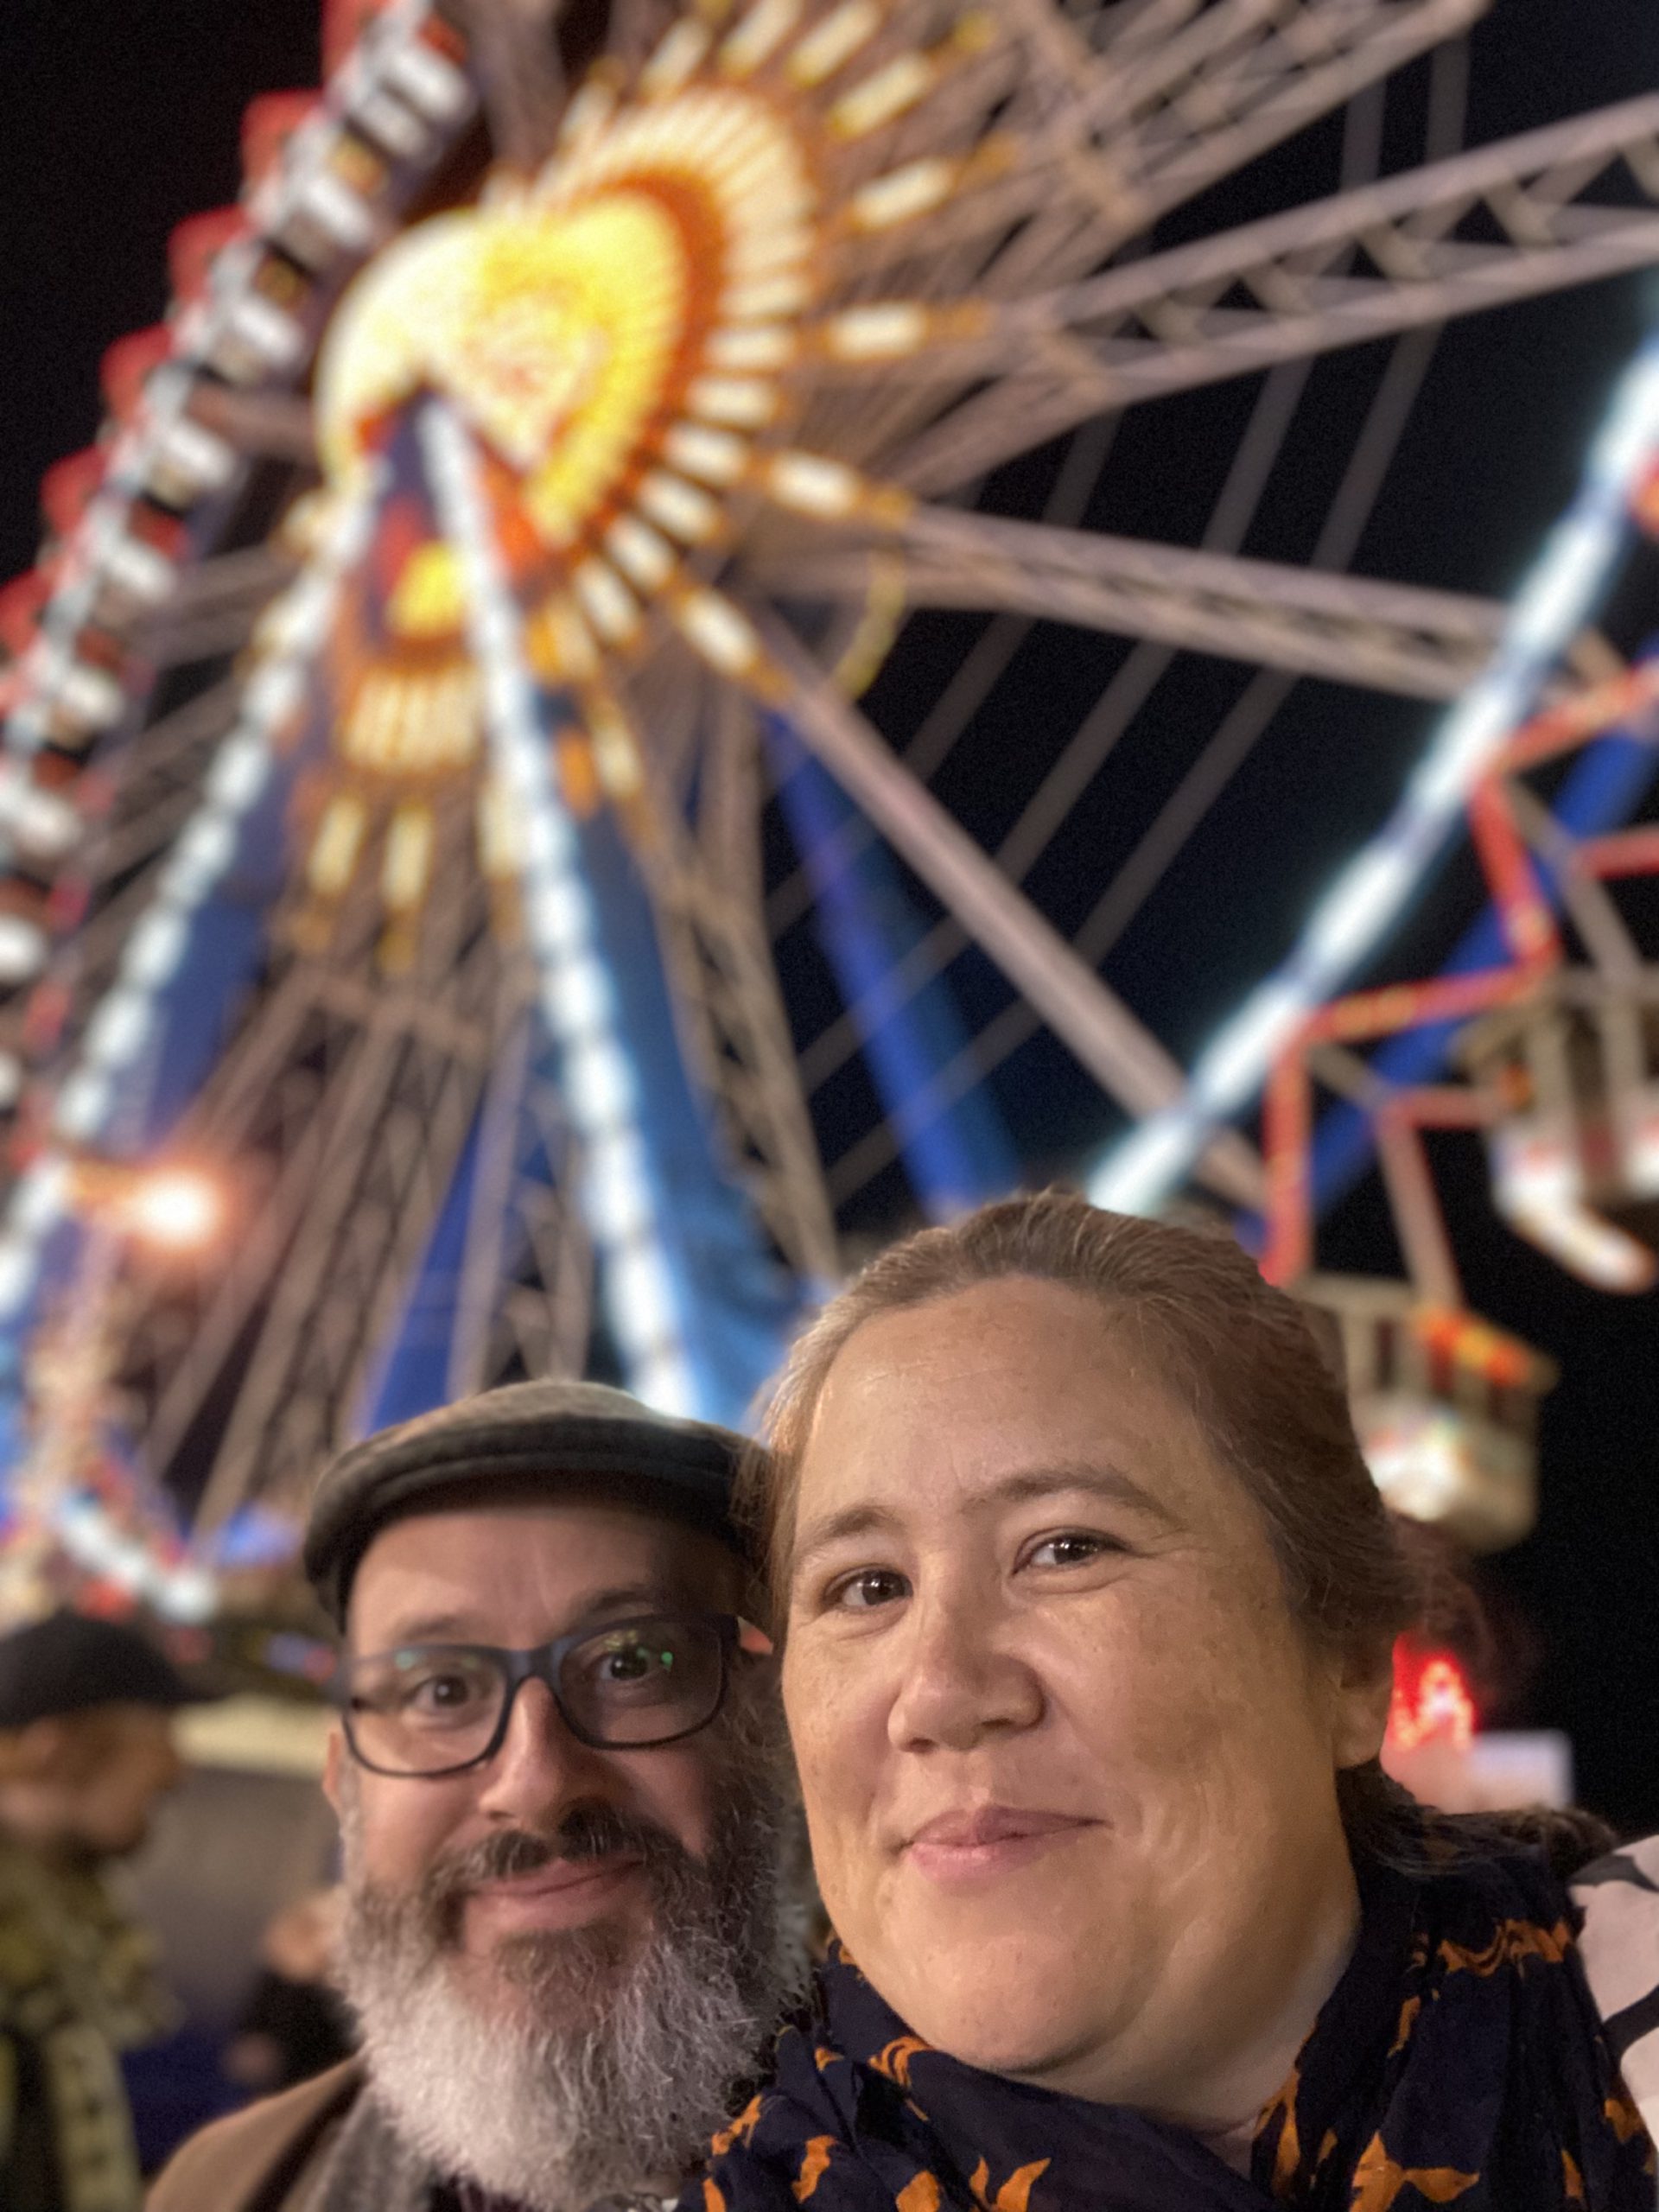 Me and Rodd and the Ferris Wheel